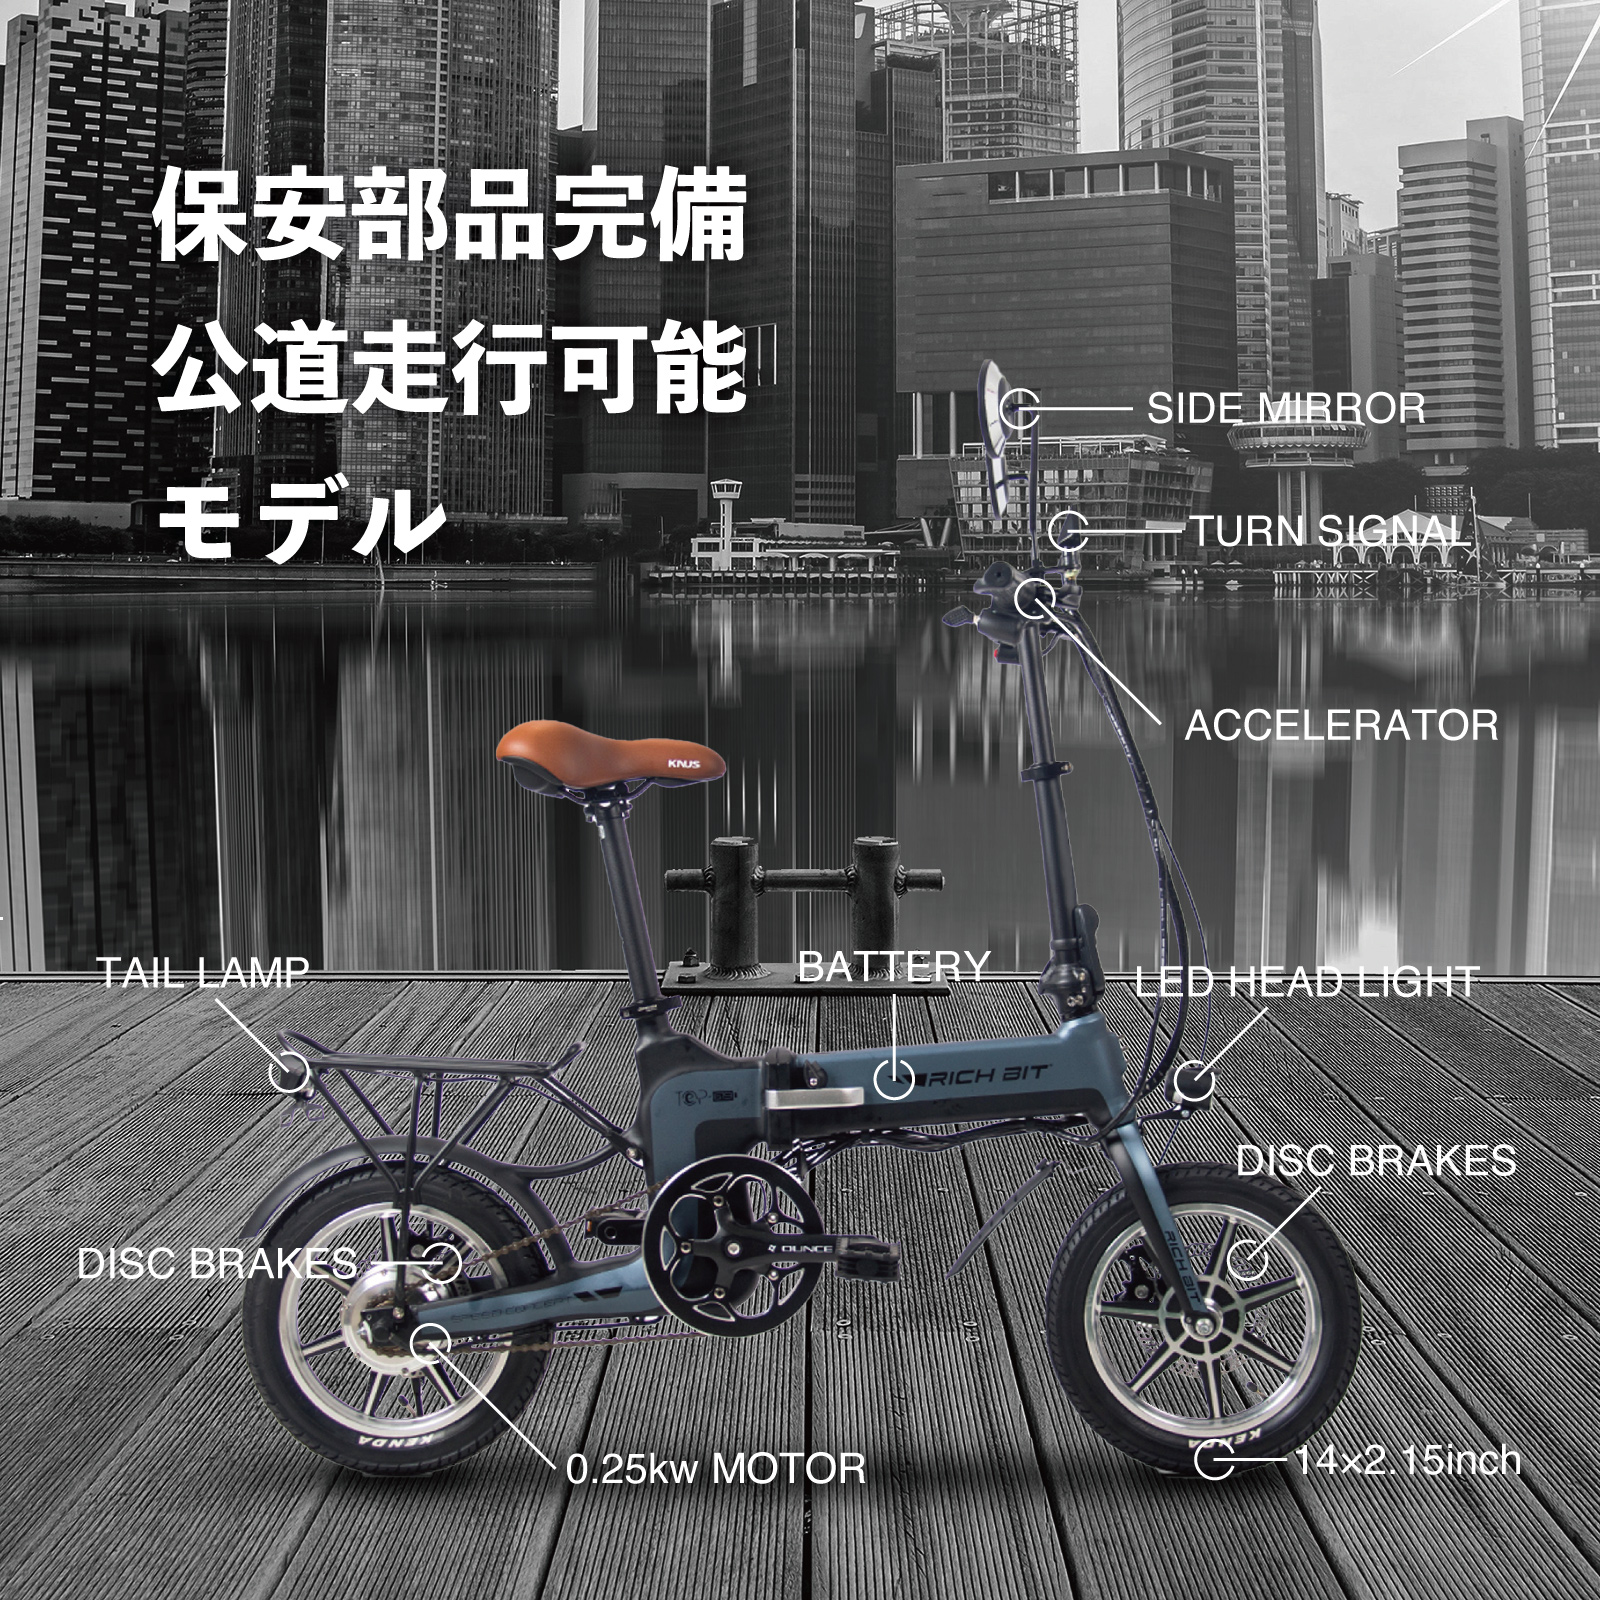  electric bike pedal attaching RICH BIT TOP619 motor-bike one kind 50cc Class possible to run in the public road folding small size full electric number acquisition possibility 